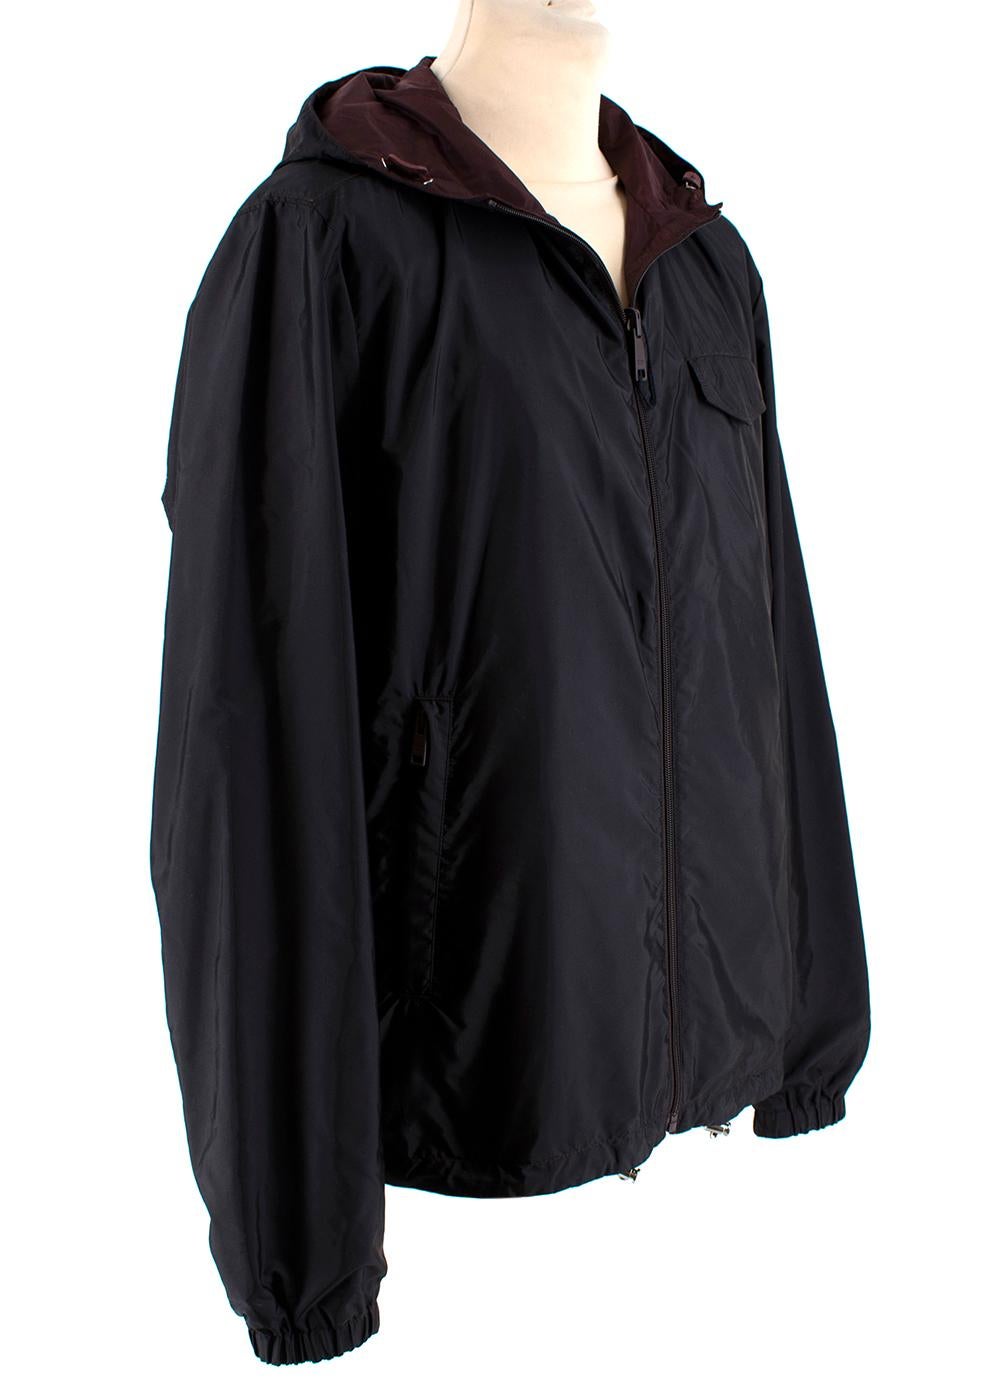 Prada Black & Burgundy Reversible Hooded Nylon Jacket 

- Made of the signature nylon 
- Branded Prada Luna Rossa Patch to the black side 
- Pockets to the front 
- Classic cut 
- Zip fastening to the front 
- Practical versatile design